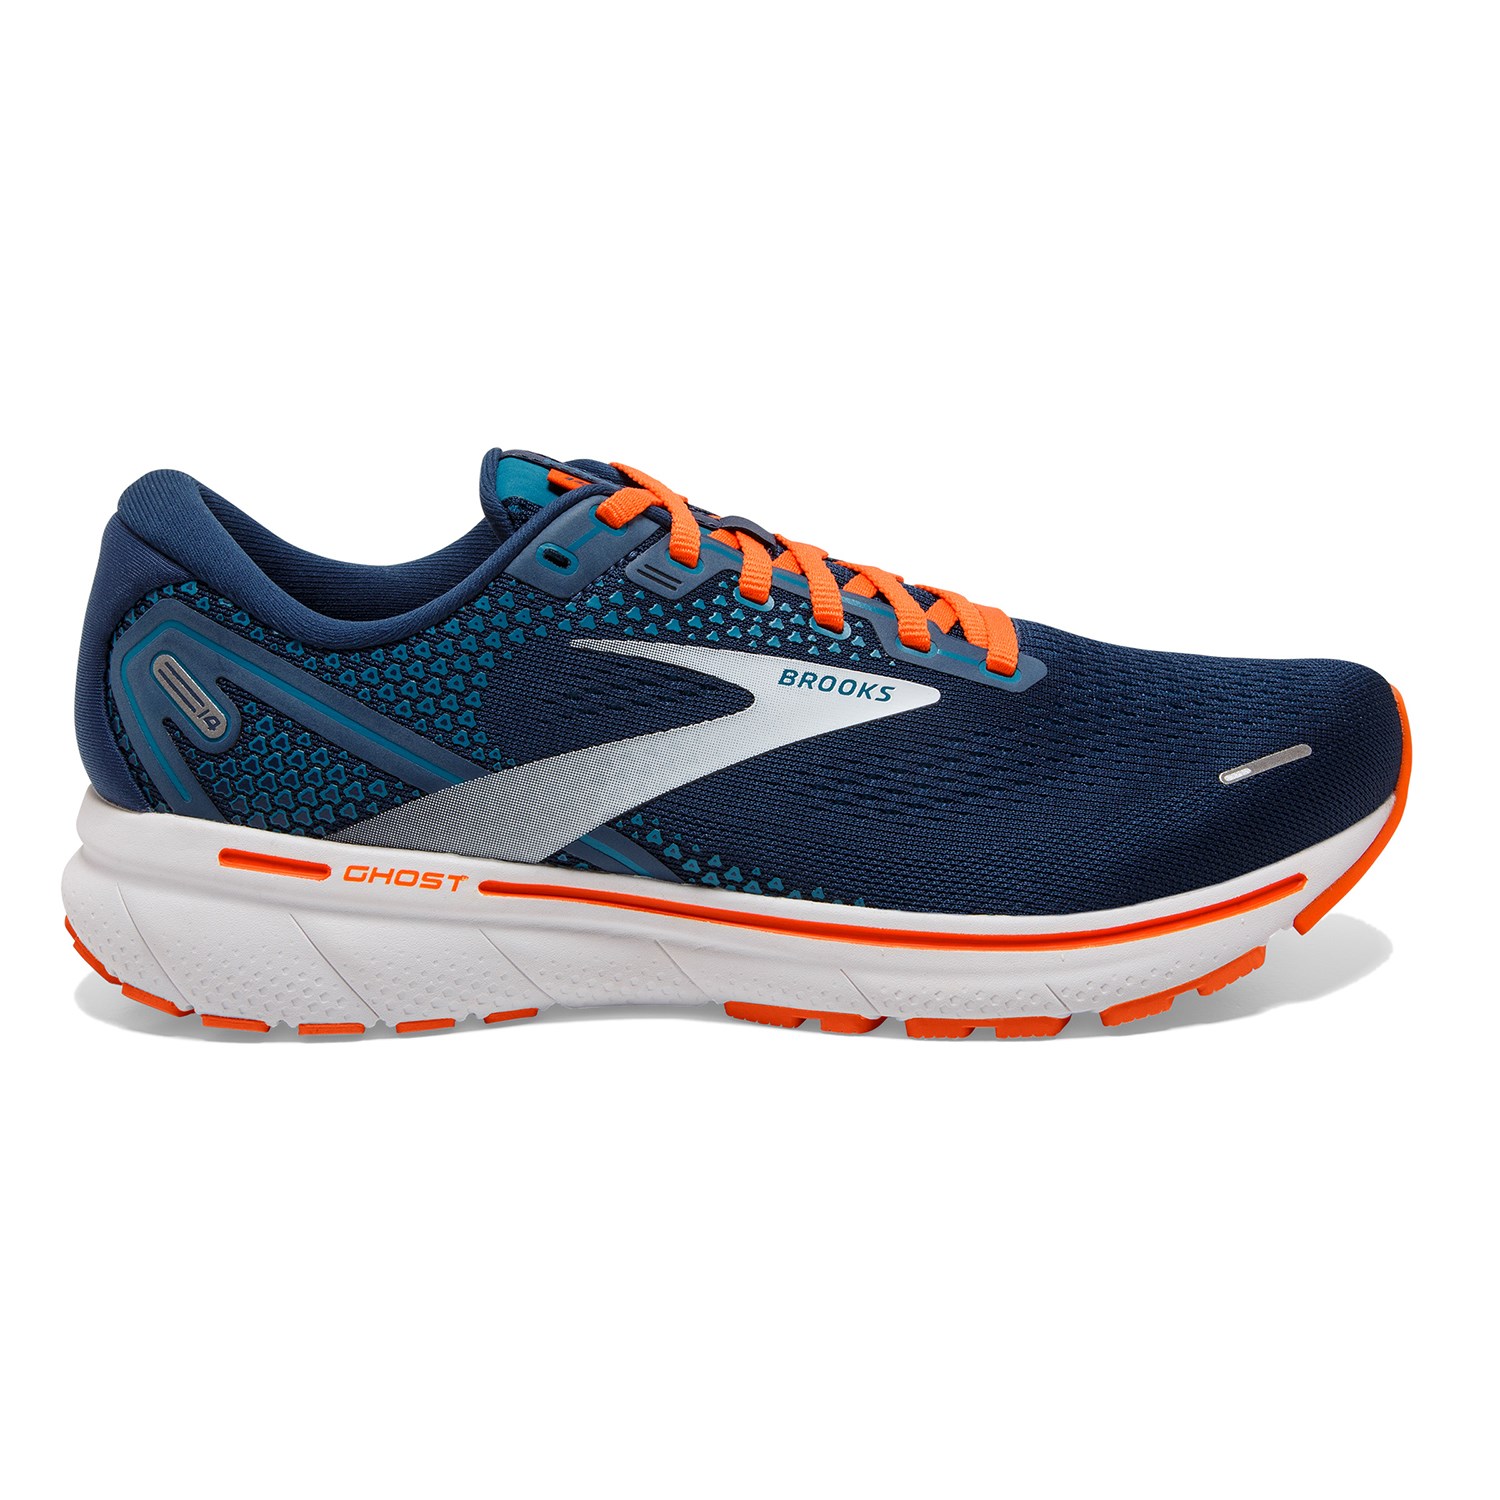 Brooks Ghost 14 - Mens Running Shoes - Titan/Teal/Flame | Sportitude